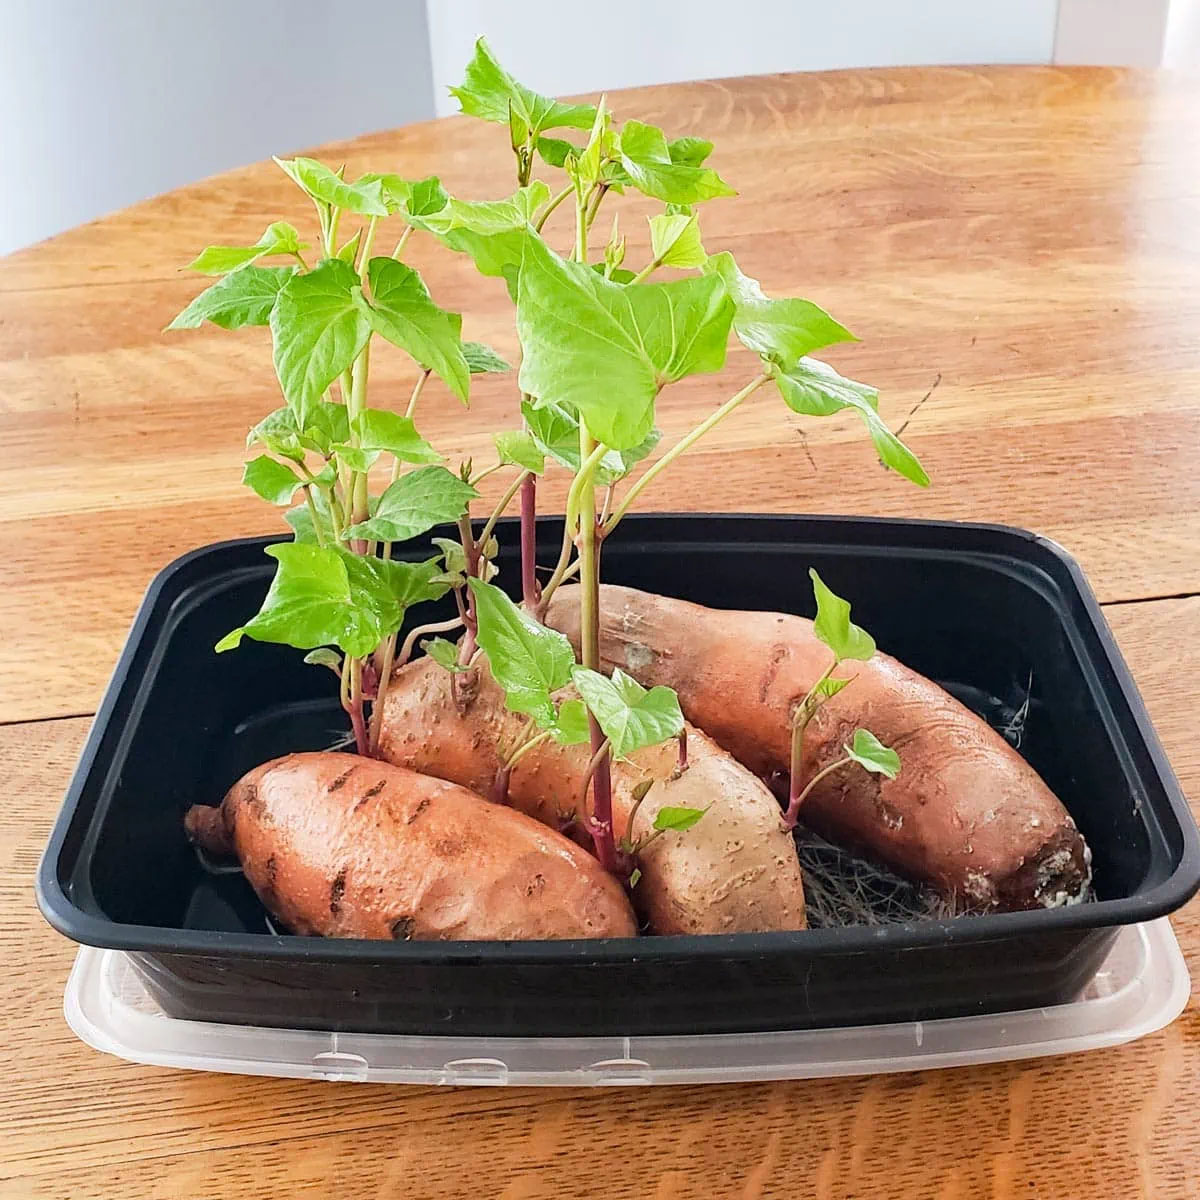 How Long Does It Take To Germinate Sweet Potatoes?